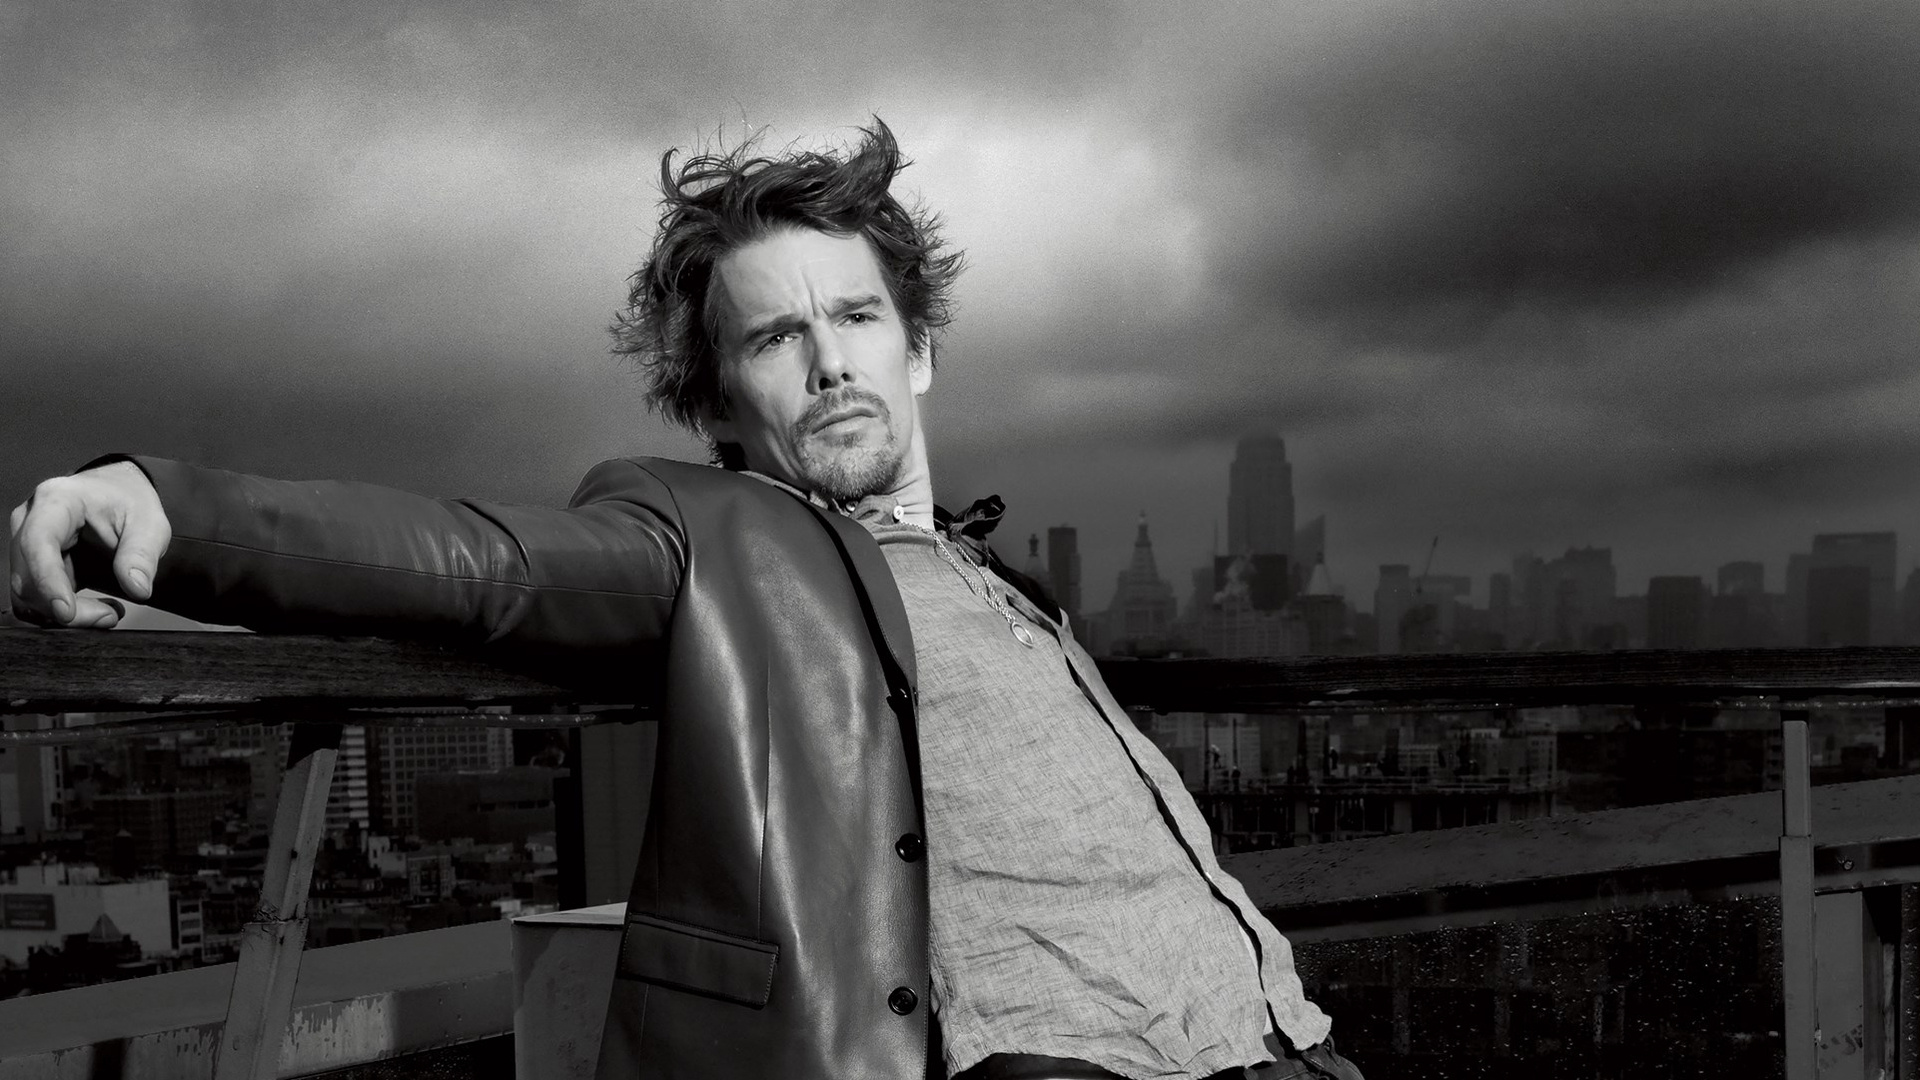 Ethan Hawke: Made a television appearance, guest starring in the second season of the television series Alias, 2003. 1920x1080 Full HD Wallpaper.